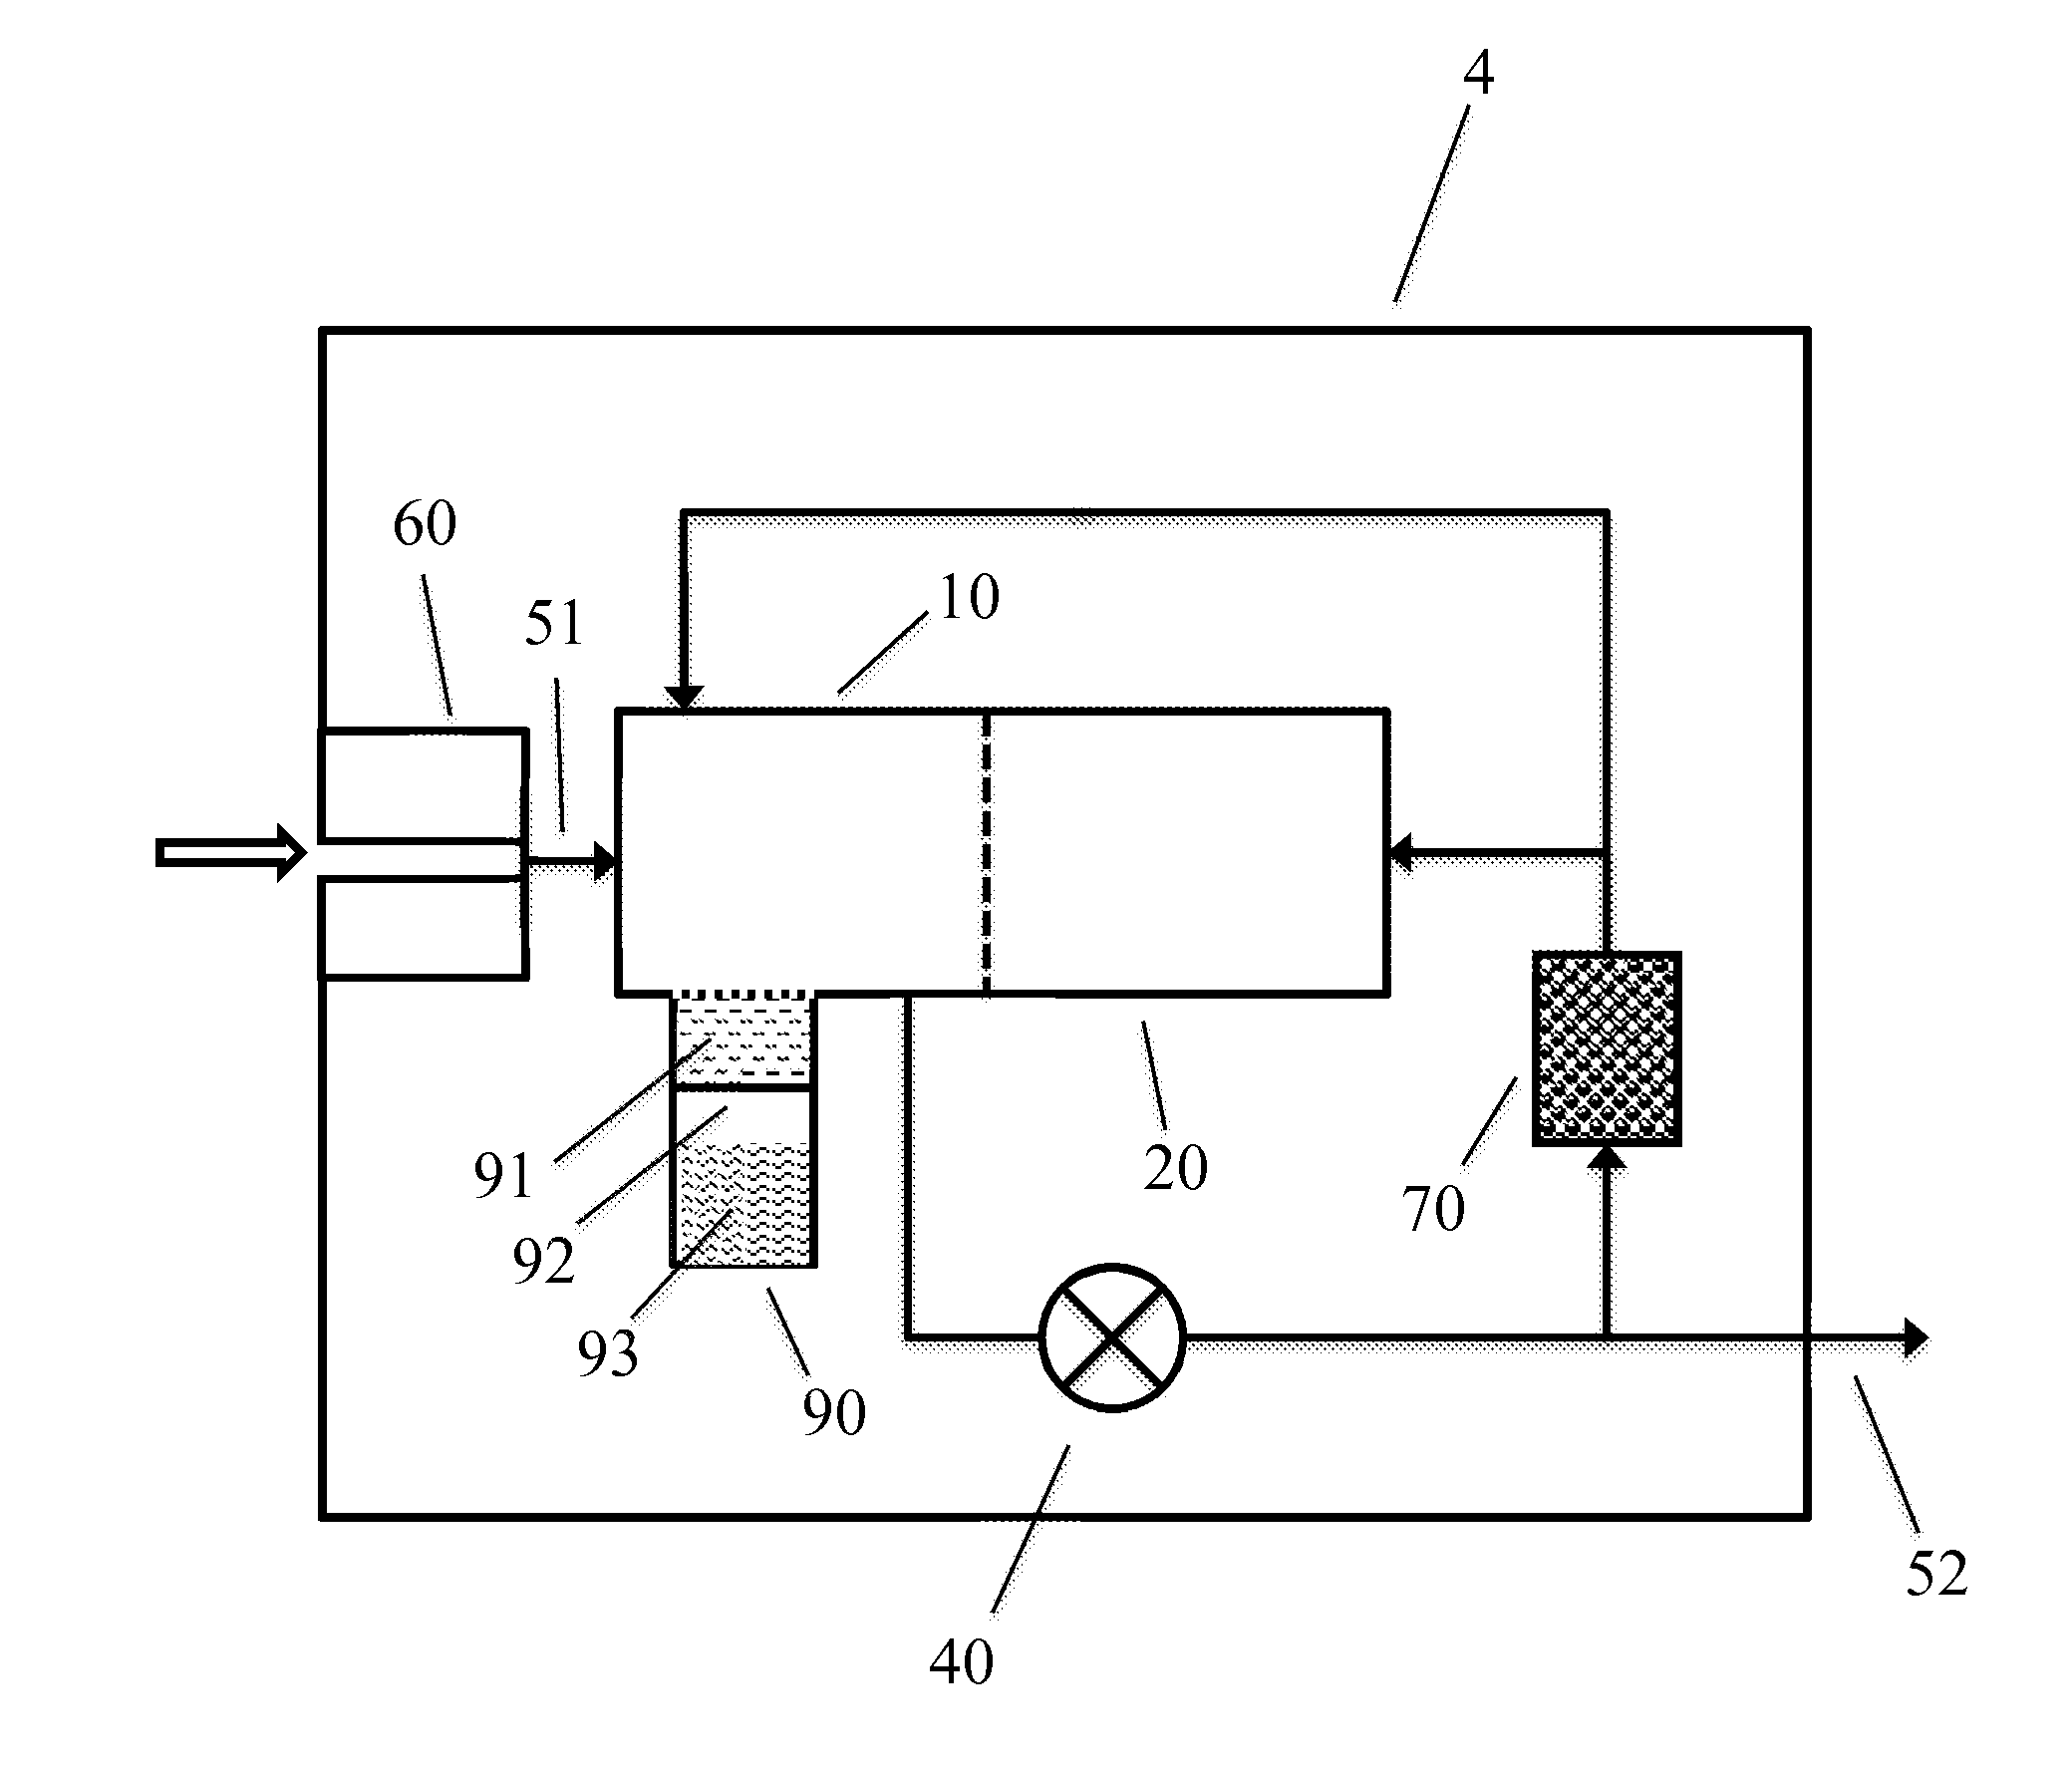 Ion mobility spectrometer with device for generating ammonia gas